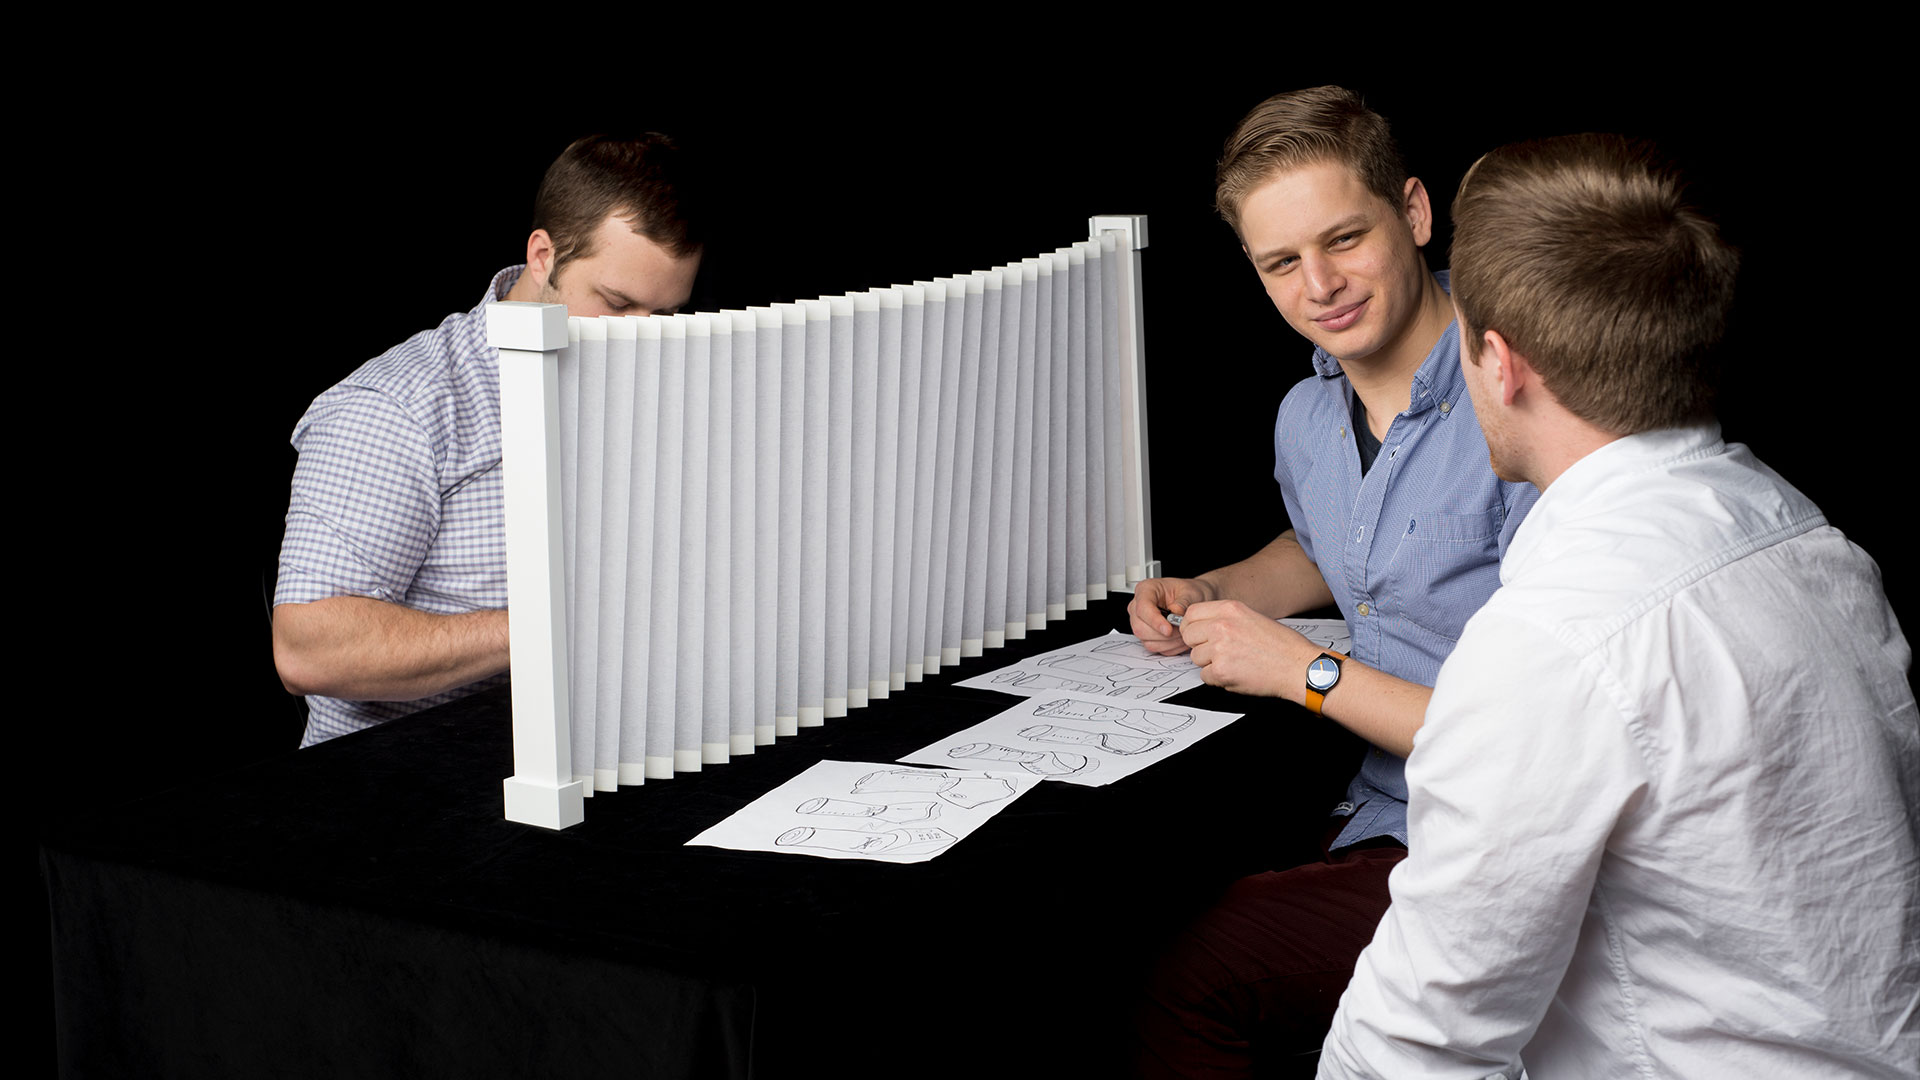 Mobile Divider fully extended into long accordion table wall for maximum privacy for students on either side of table